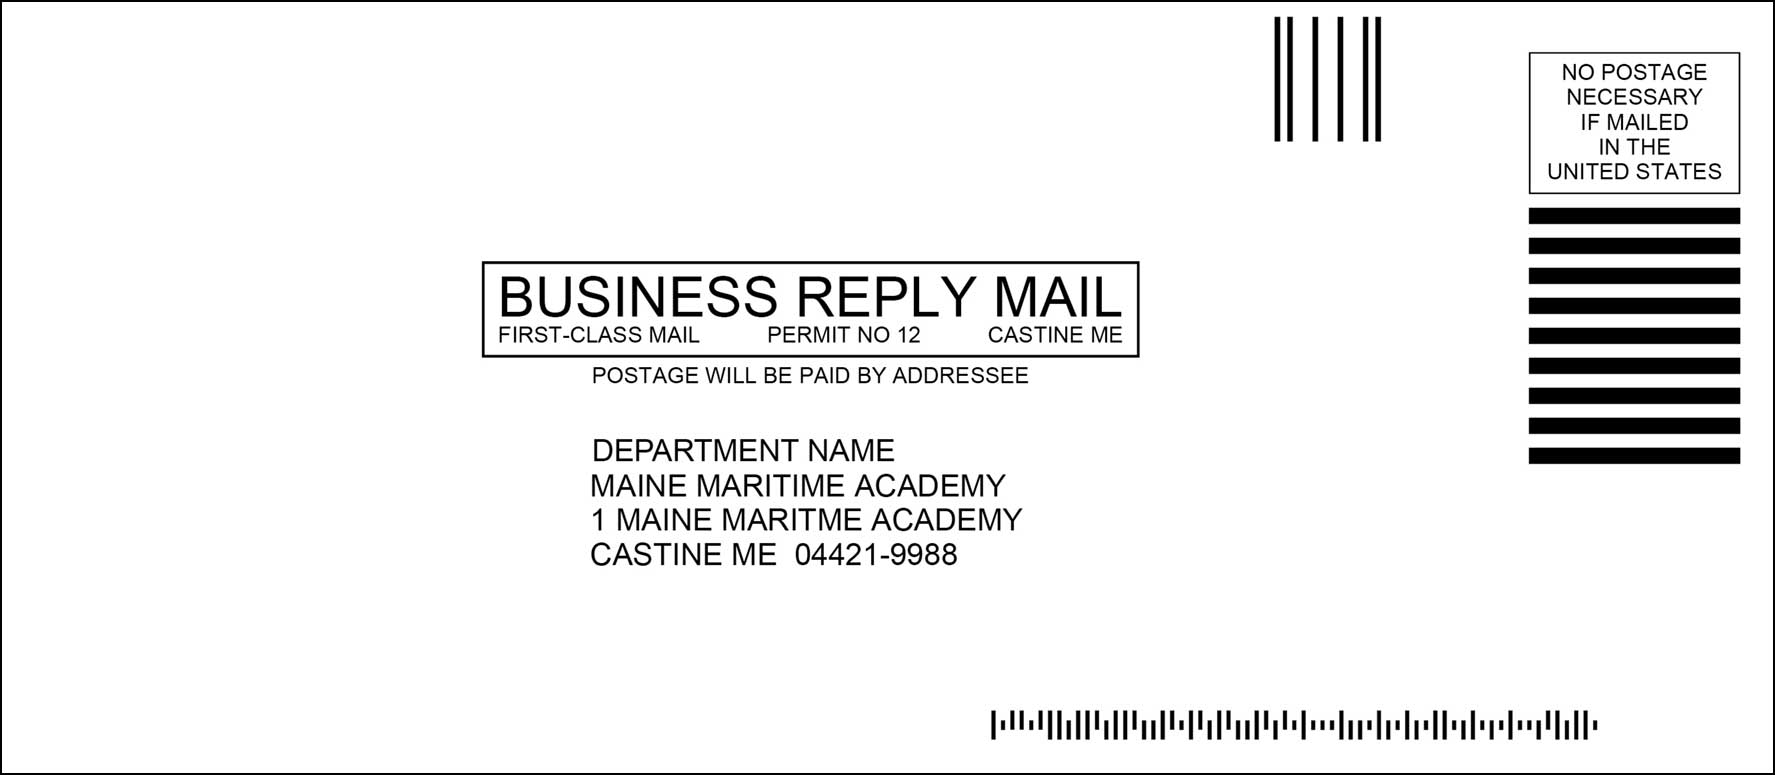 Business Reply Envelope Artwork - BISUNIS Pertaining To Usps Business Reply Mail Template